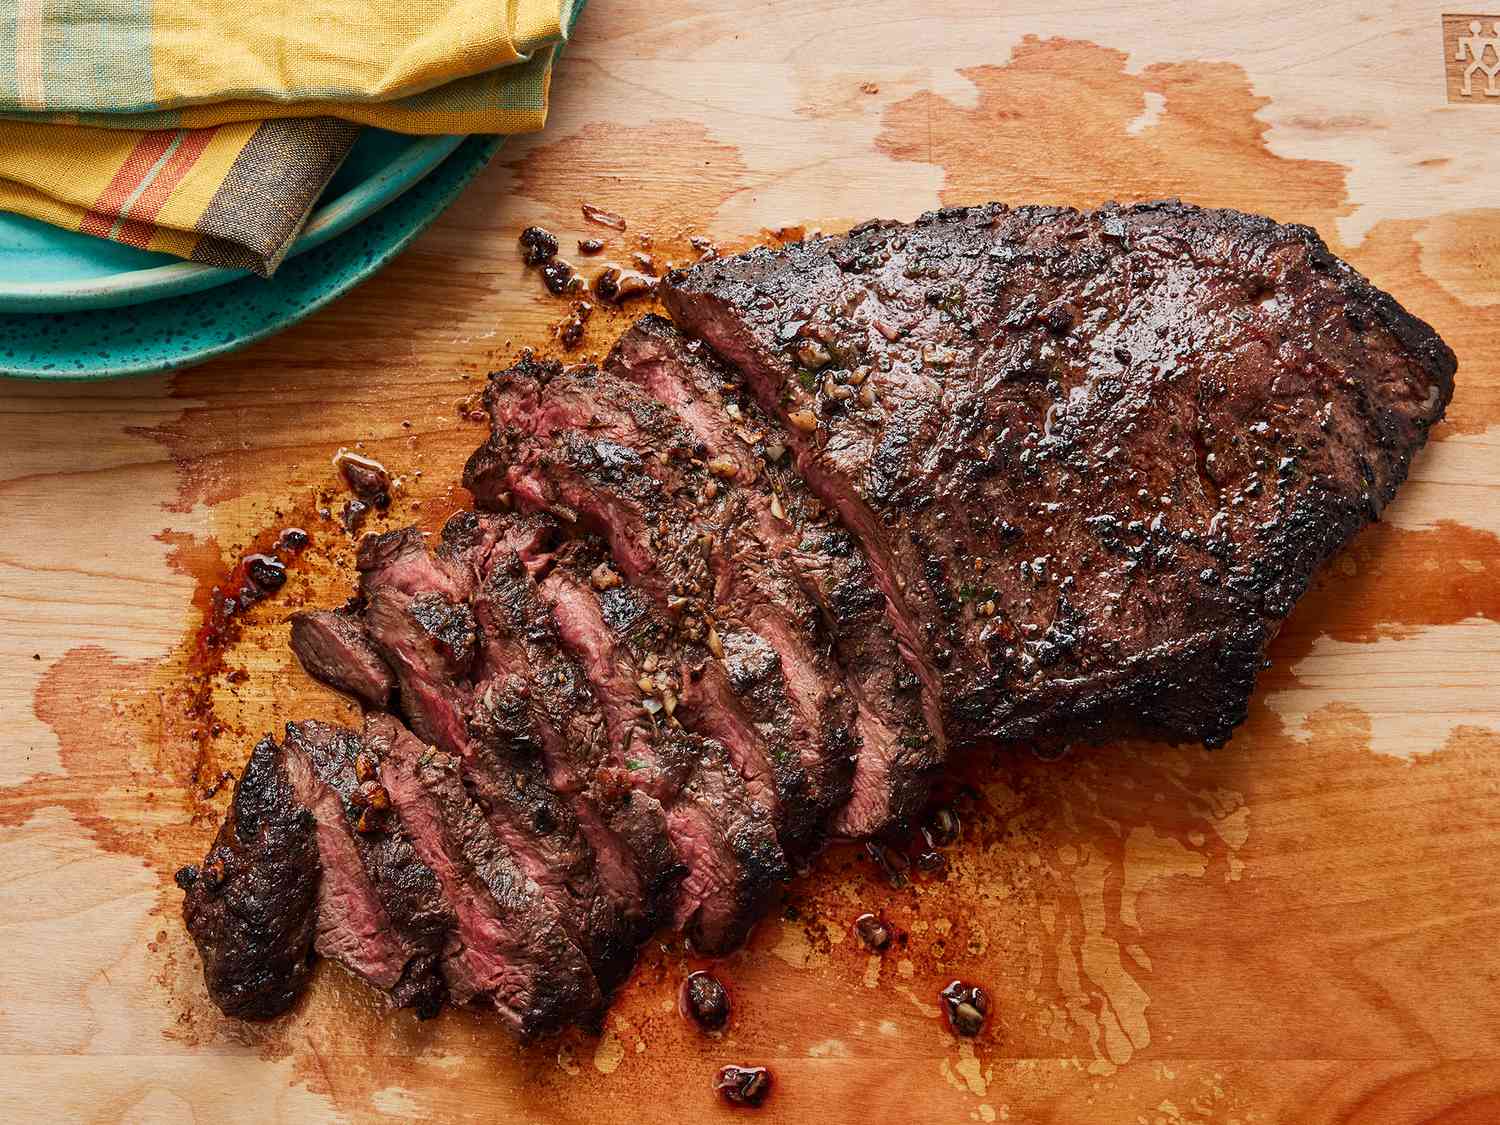 Overhead angle, looking down at sliced flat iron steak on a cutting board